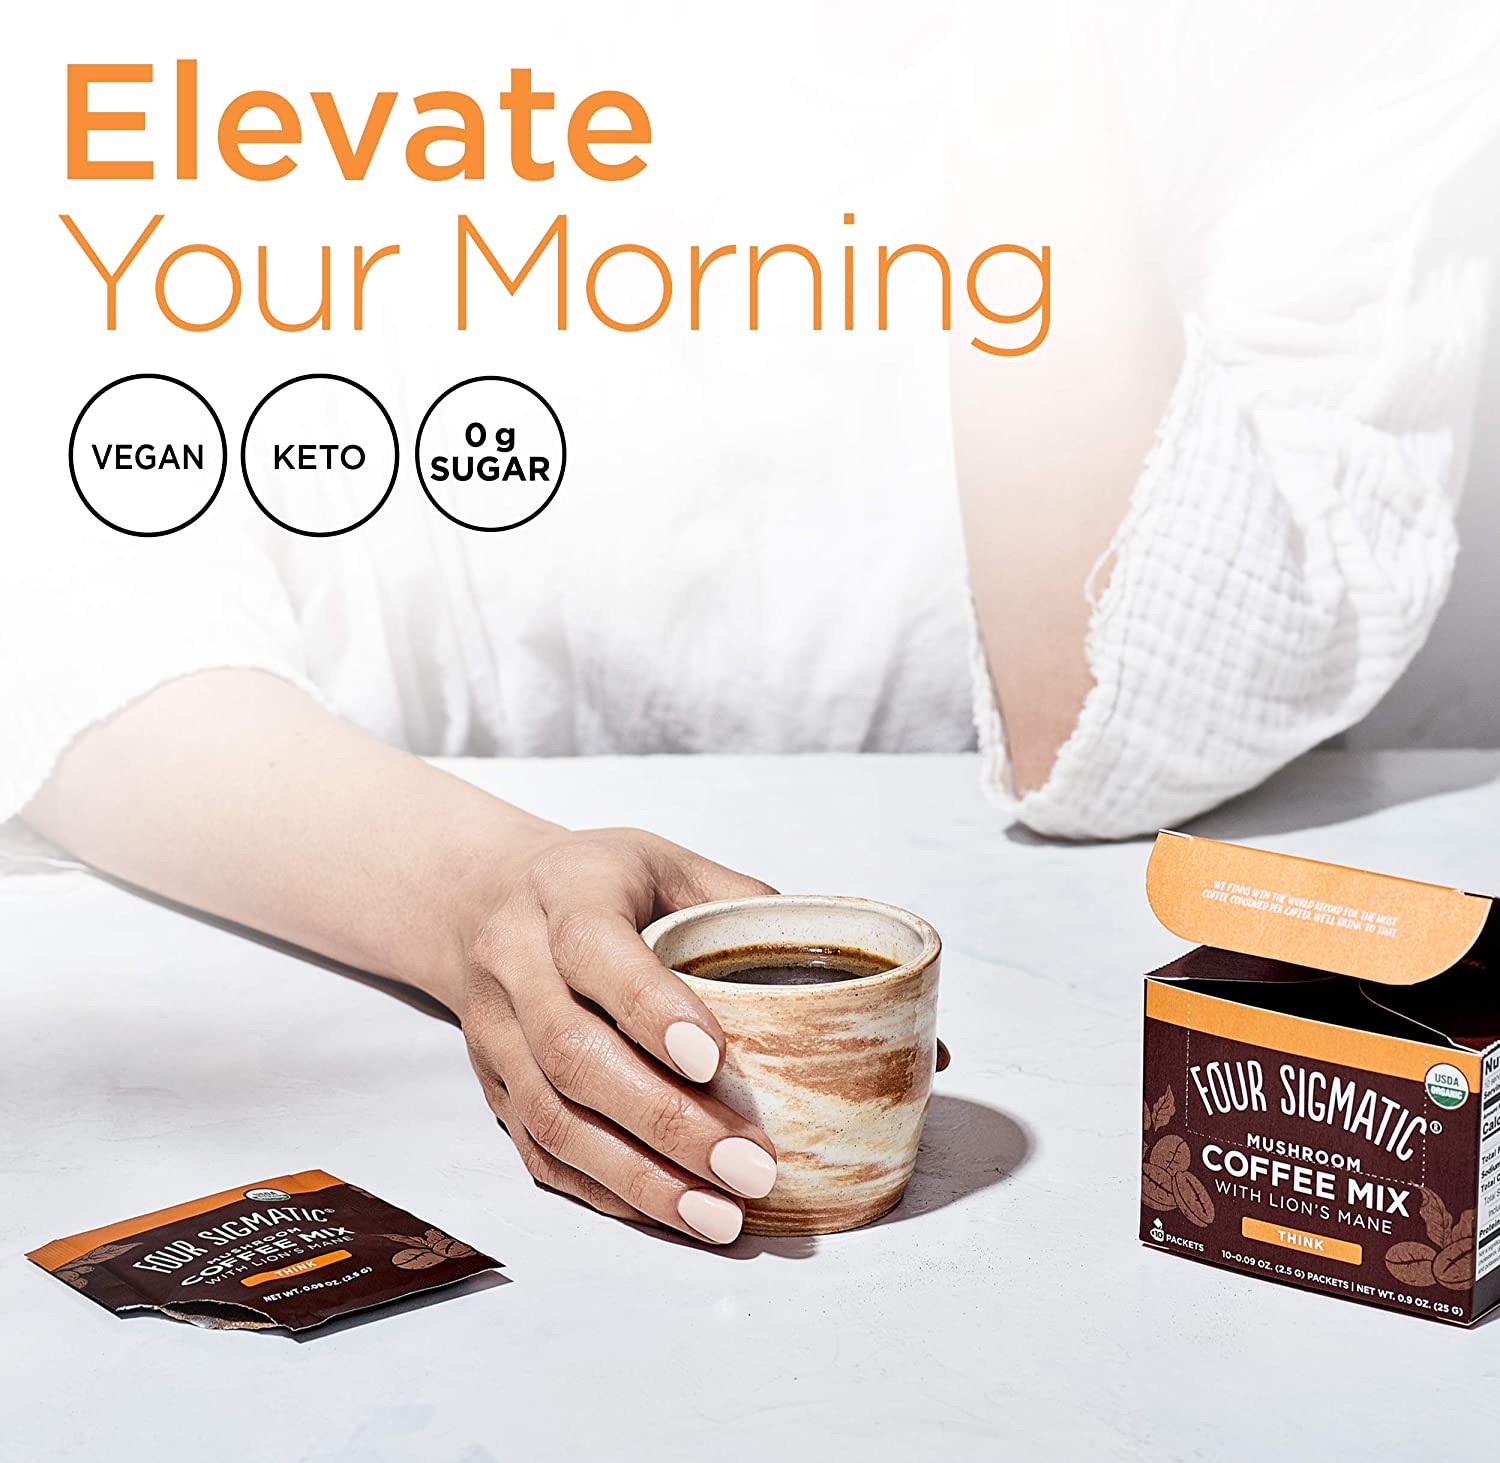 Amazon.com : Mushroom Coffee by Four Sigmatic, Organic and Fair Trade Instant Coffee with Lions Mane, Chaga, & Mushroom Powder, Focus & Immune Support, 10 Count : Grocery & Gourmet Food蘑菇咖啡